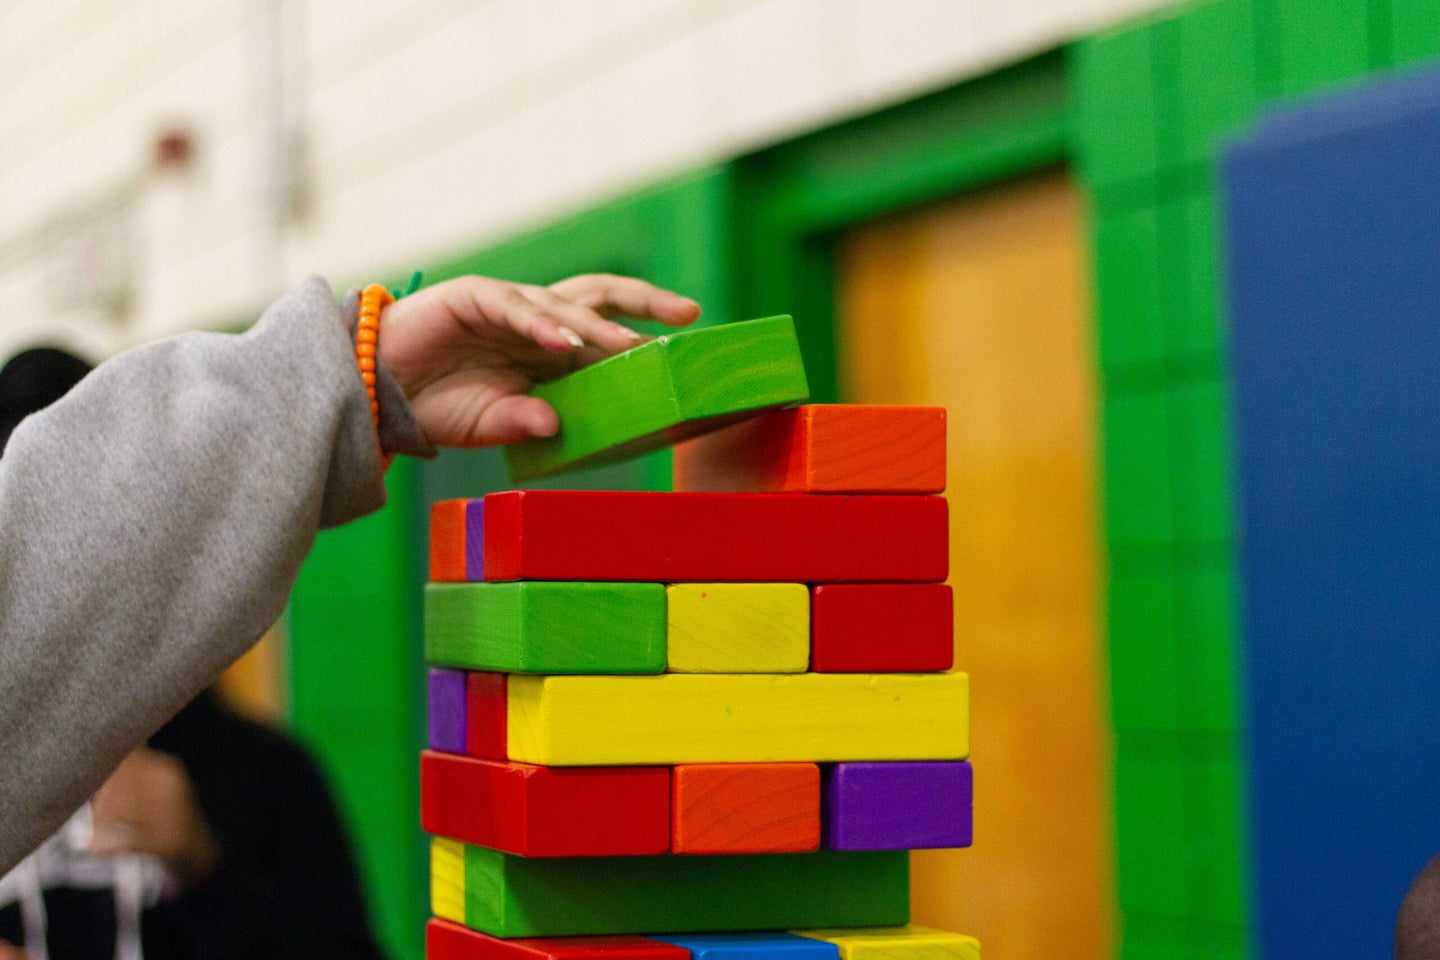 Kid playing with blocks